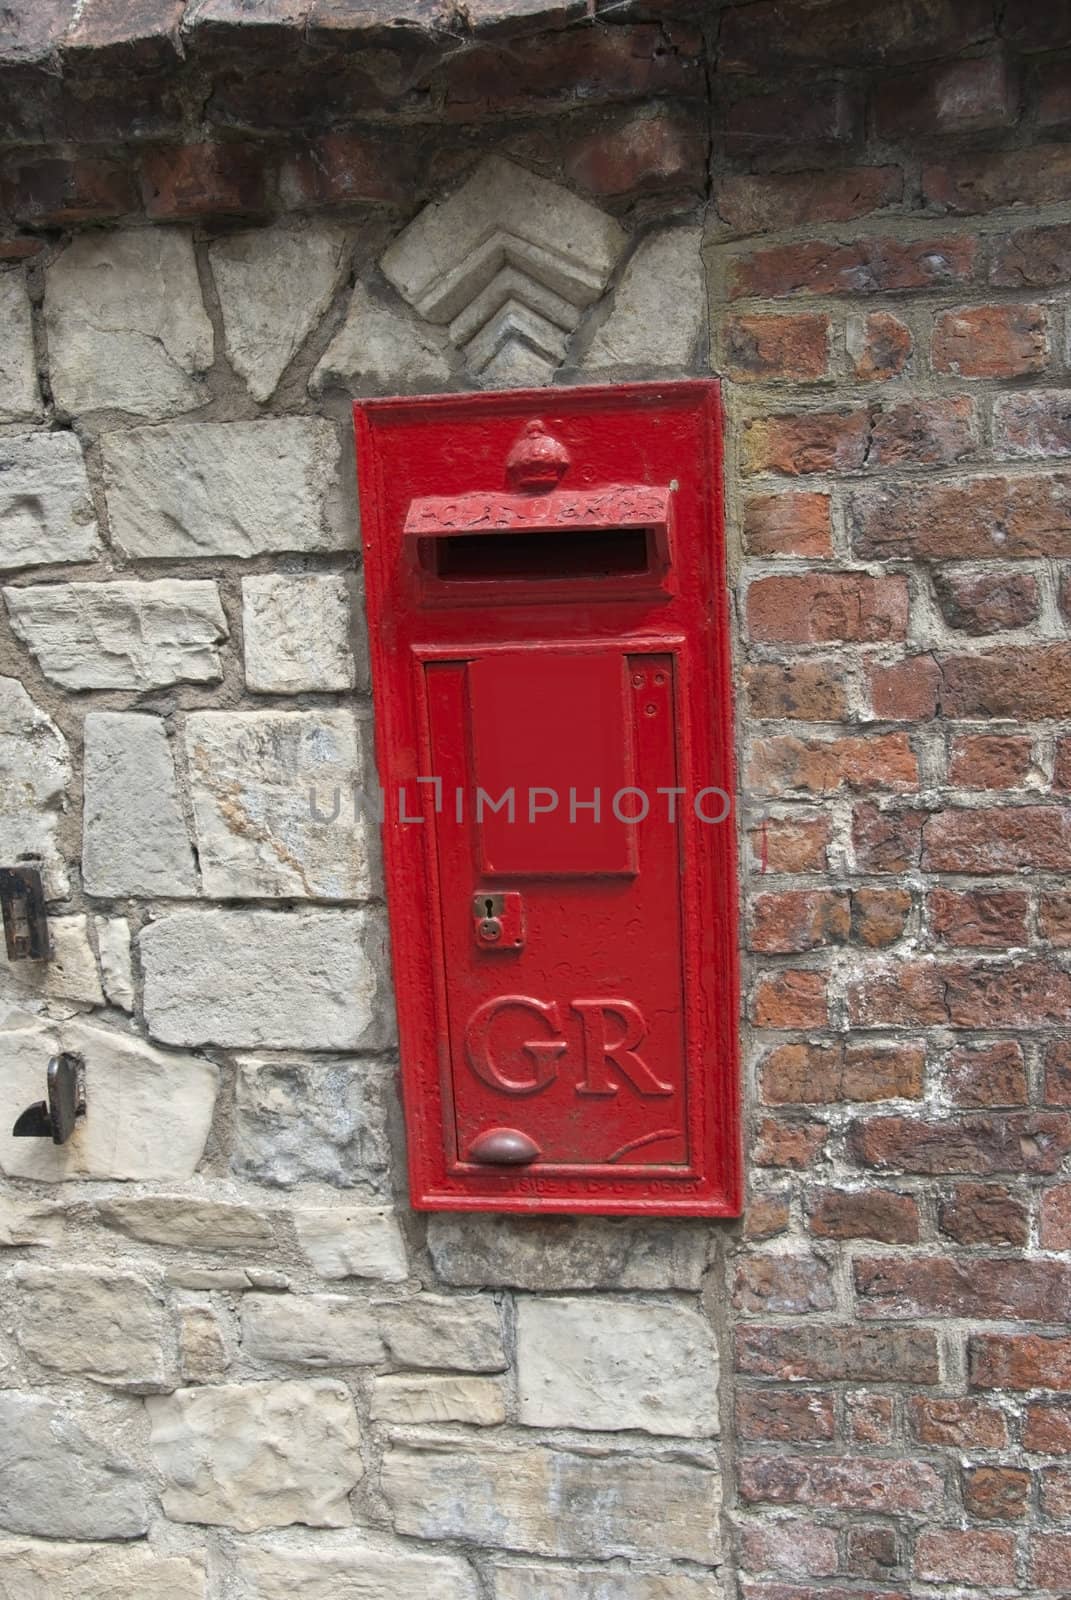 A Red British Post Box set in a stone wall